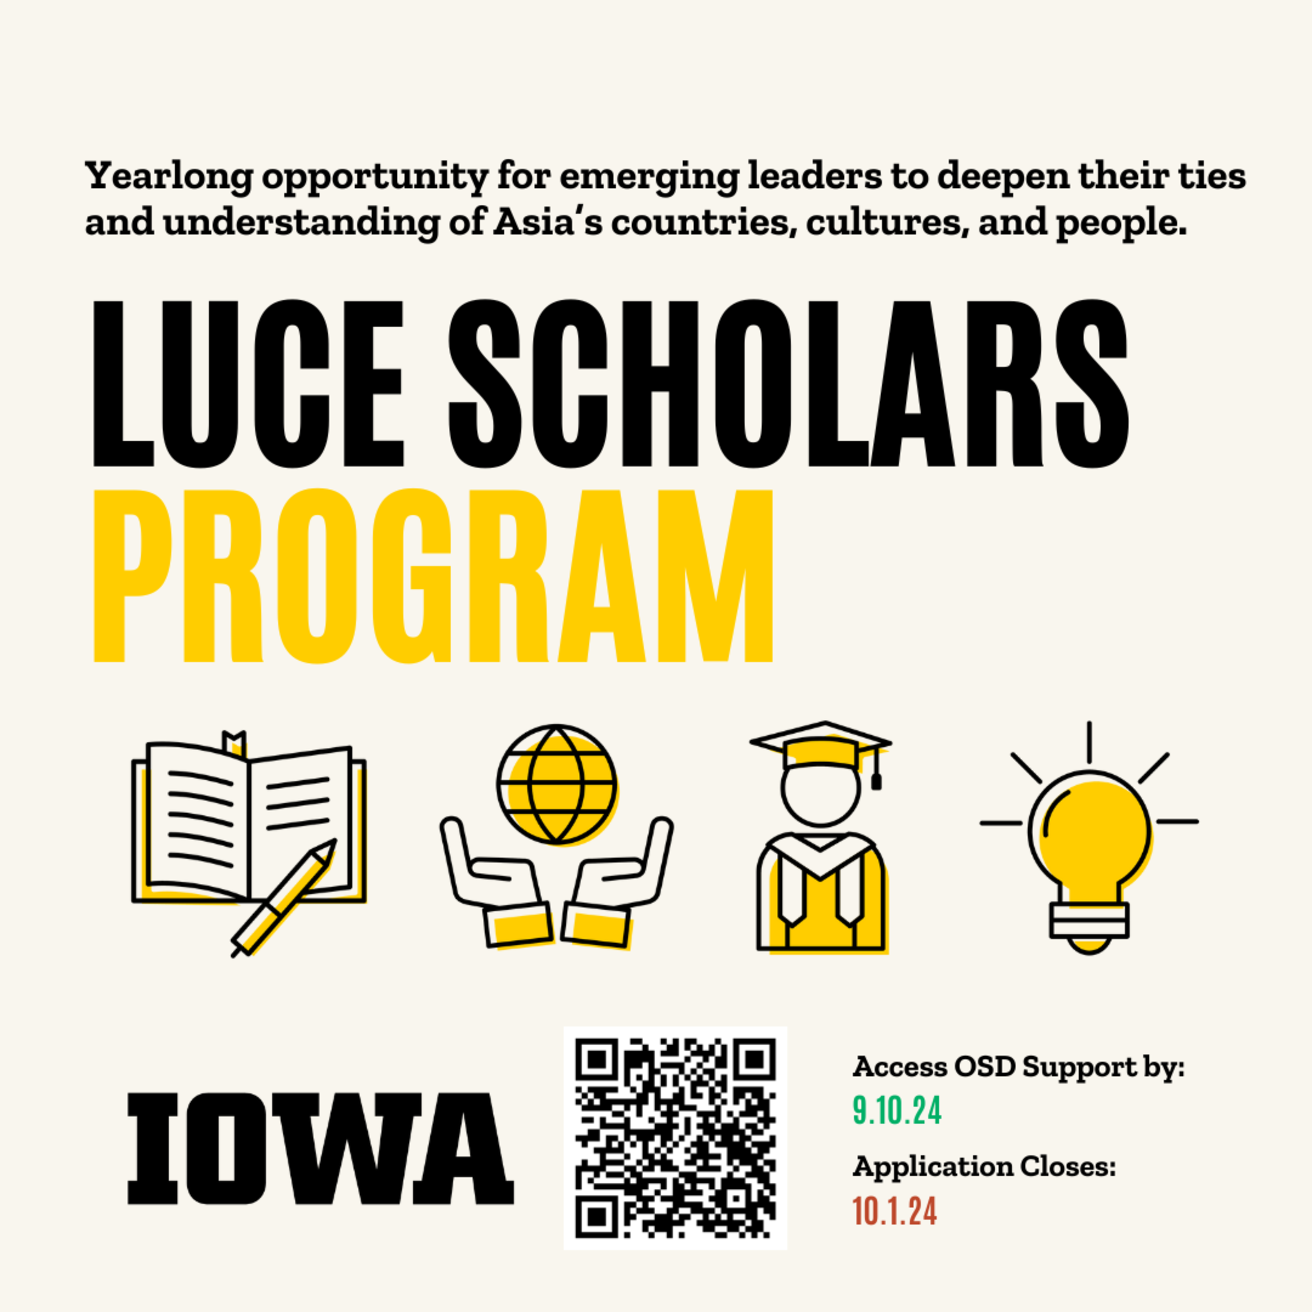 Luce Scholars Program name presented above graphich images of an open book, two hands holding the world, a gender neutral graduate in a cap and gown, and a beaming light bulb